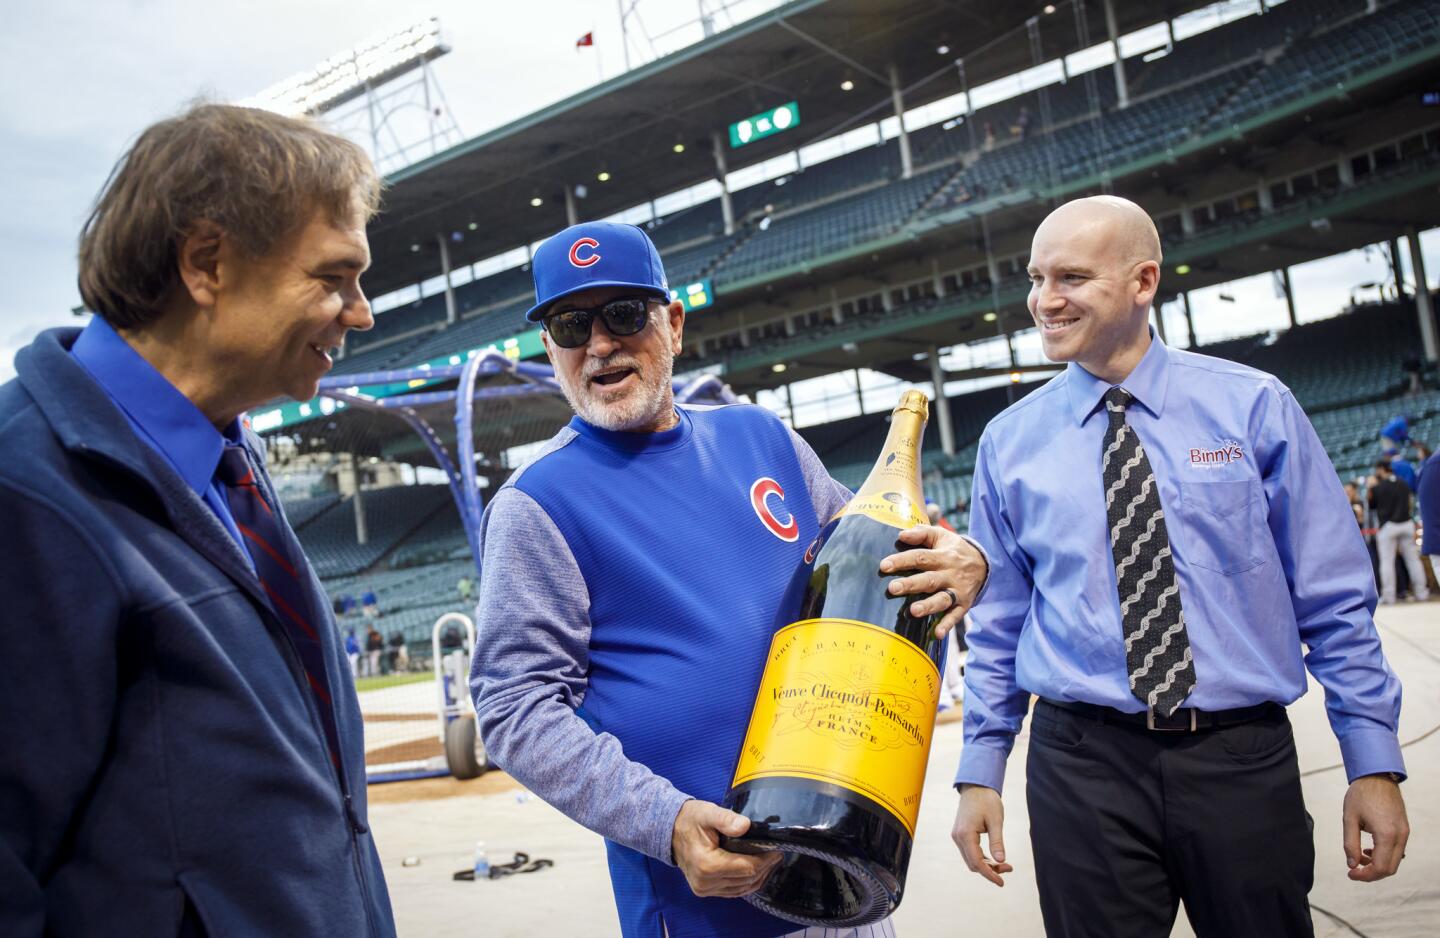 Cubs manager Joe Maddon holds a 15-liter "Nebuchadnezzar" bottle of champagne as part of a pre-game promotion Monday, May 22, 2017, at Wrigley Field.